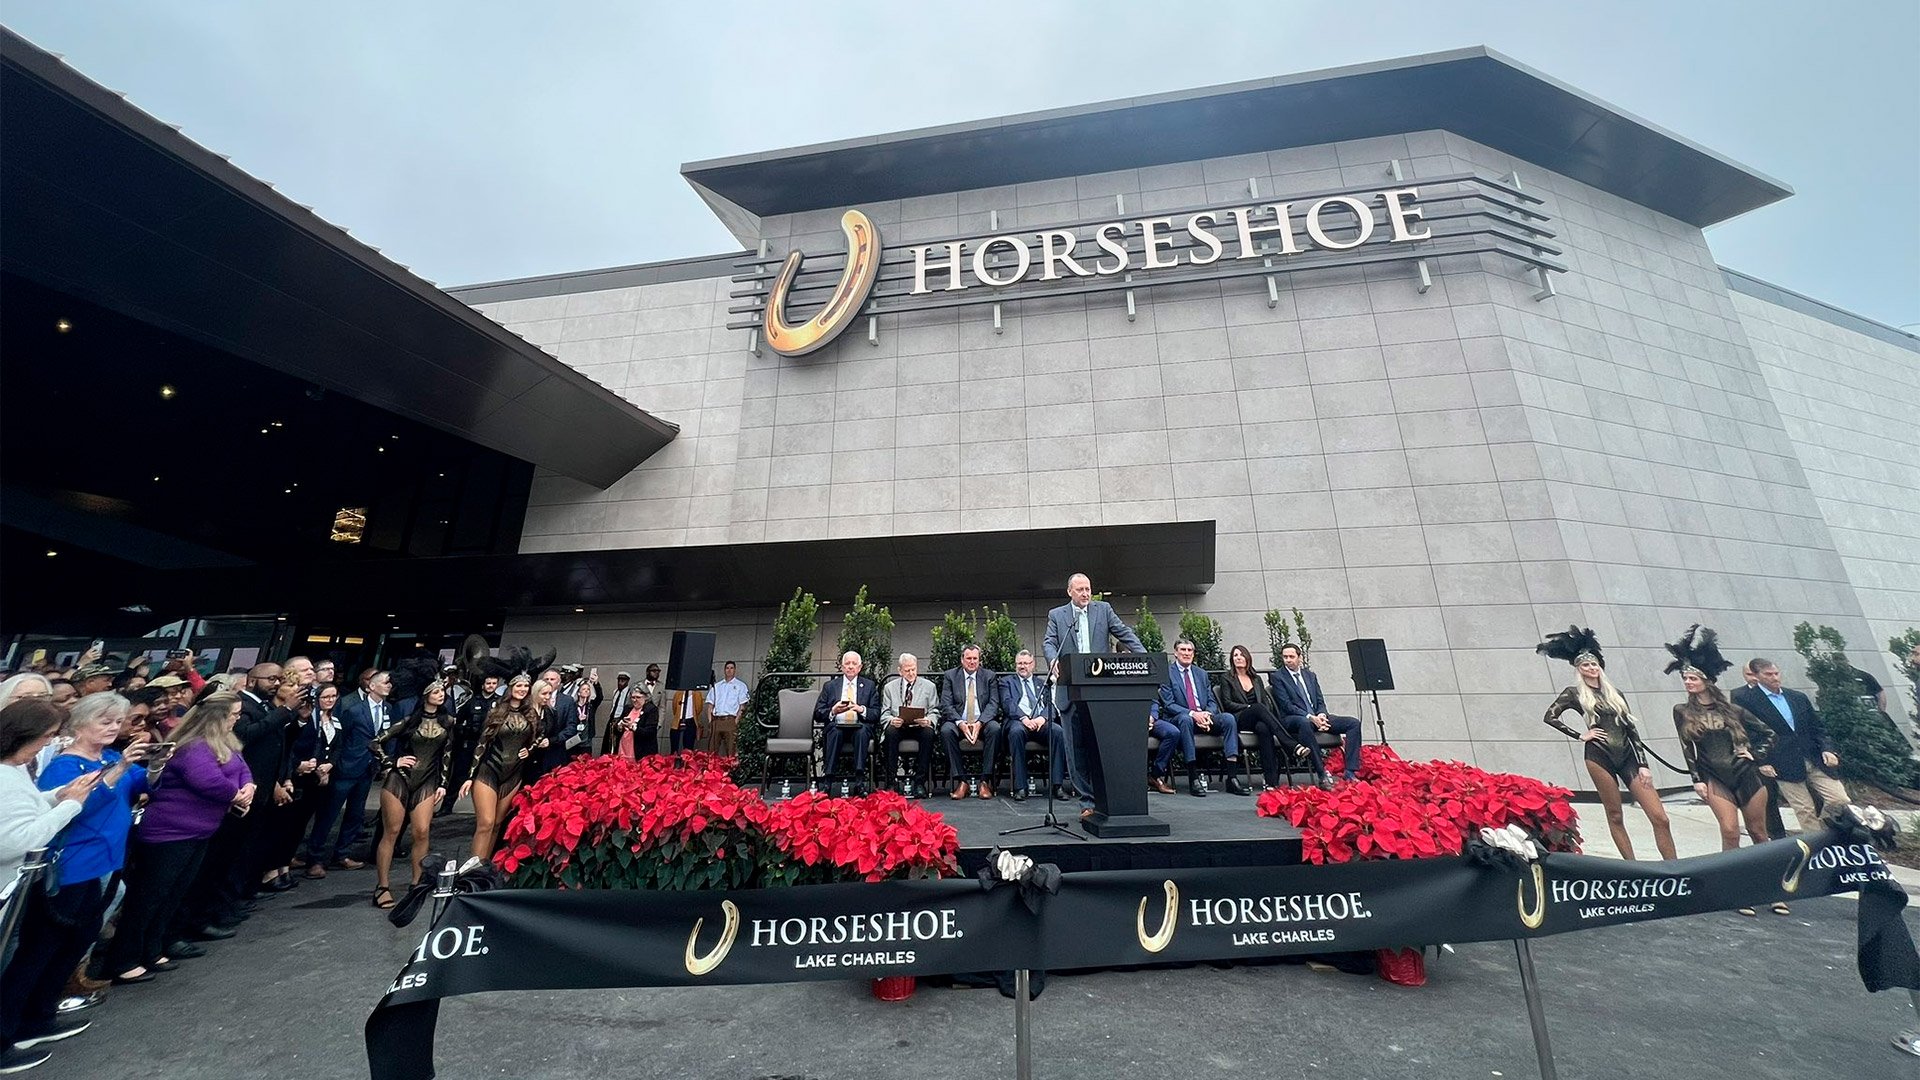 Horseshoe Hotels and Casinos in Baltimore, Bossier City and more